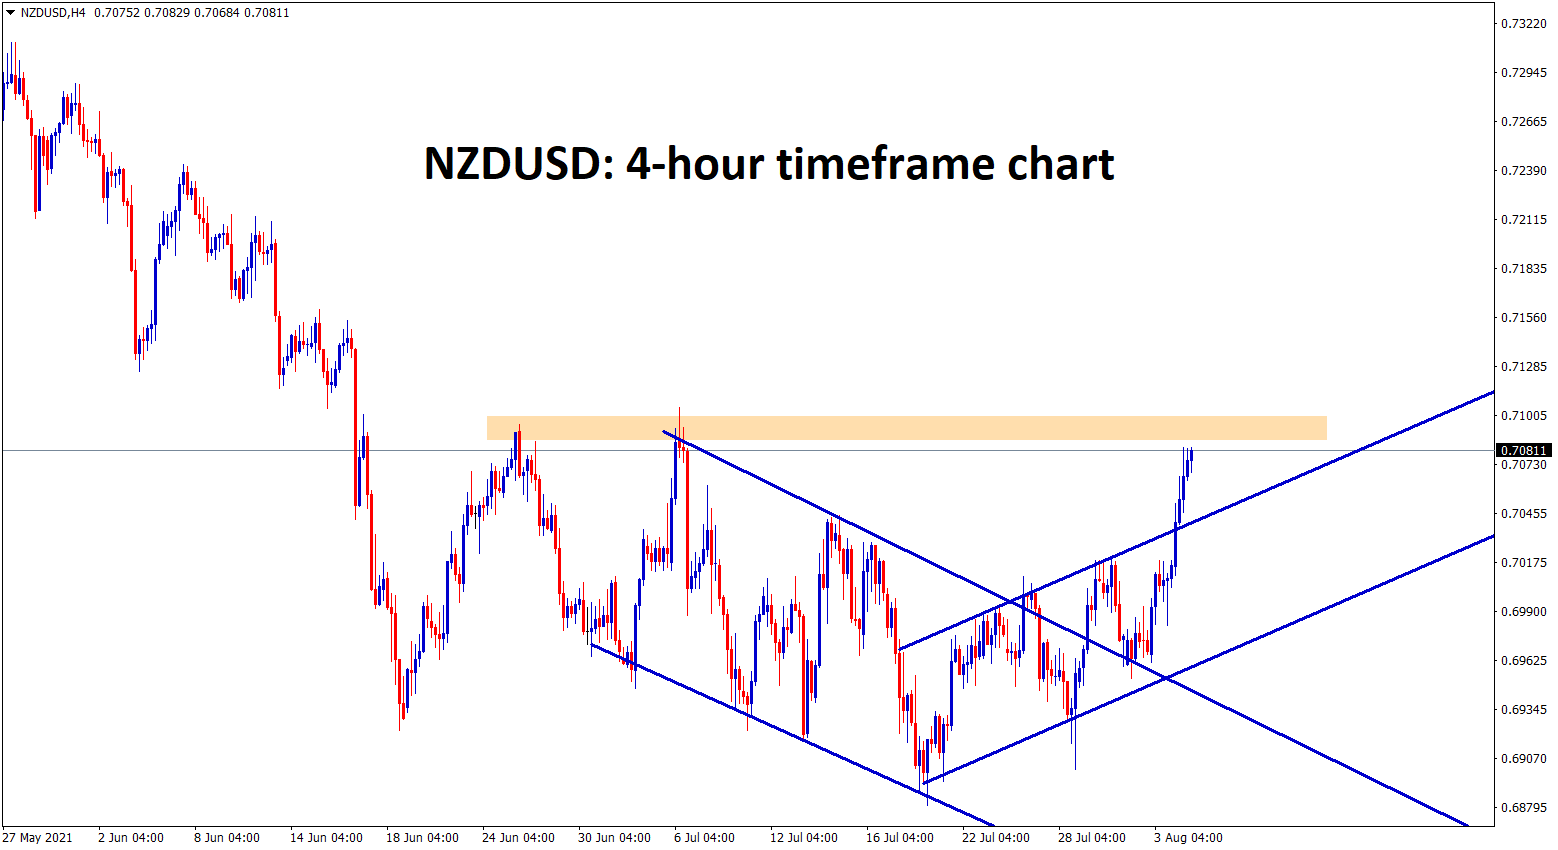 NZDUSD is going to reach the resistance area after breaking the channel ranges